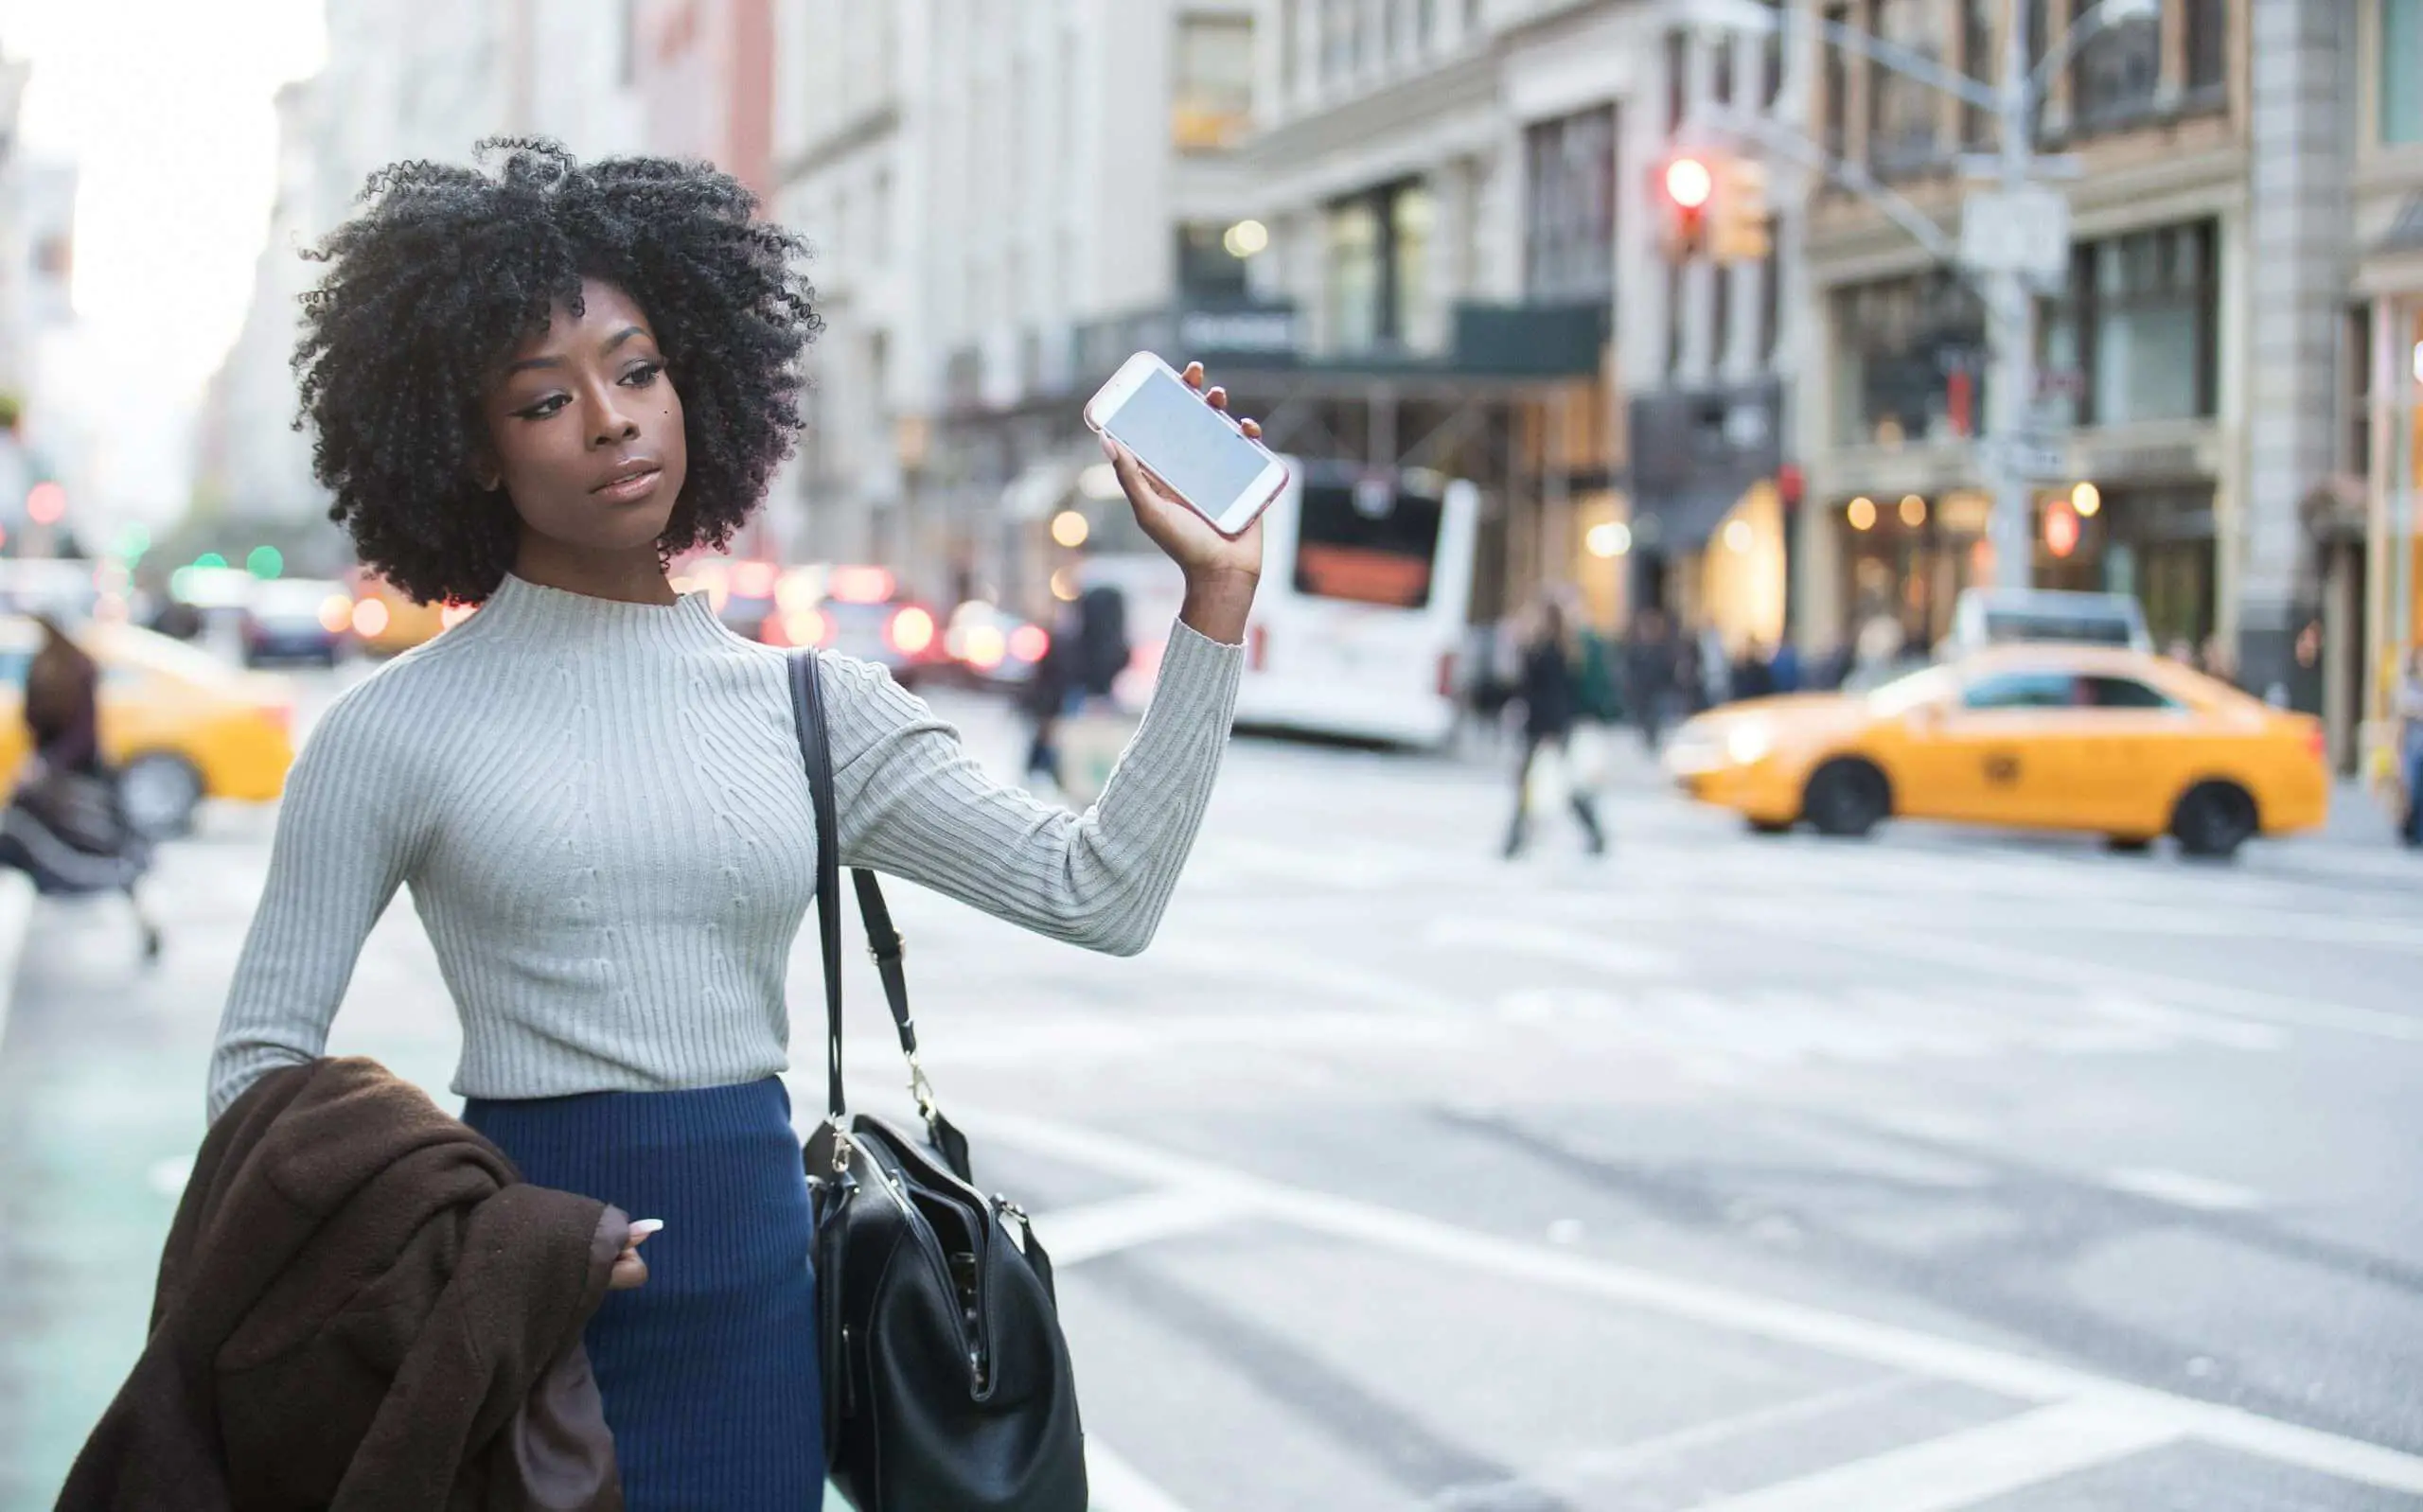 Black business women with natural hair holding up a I phone in the city